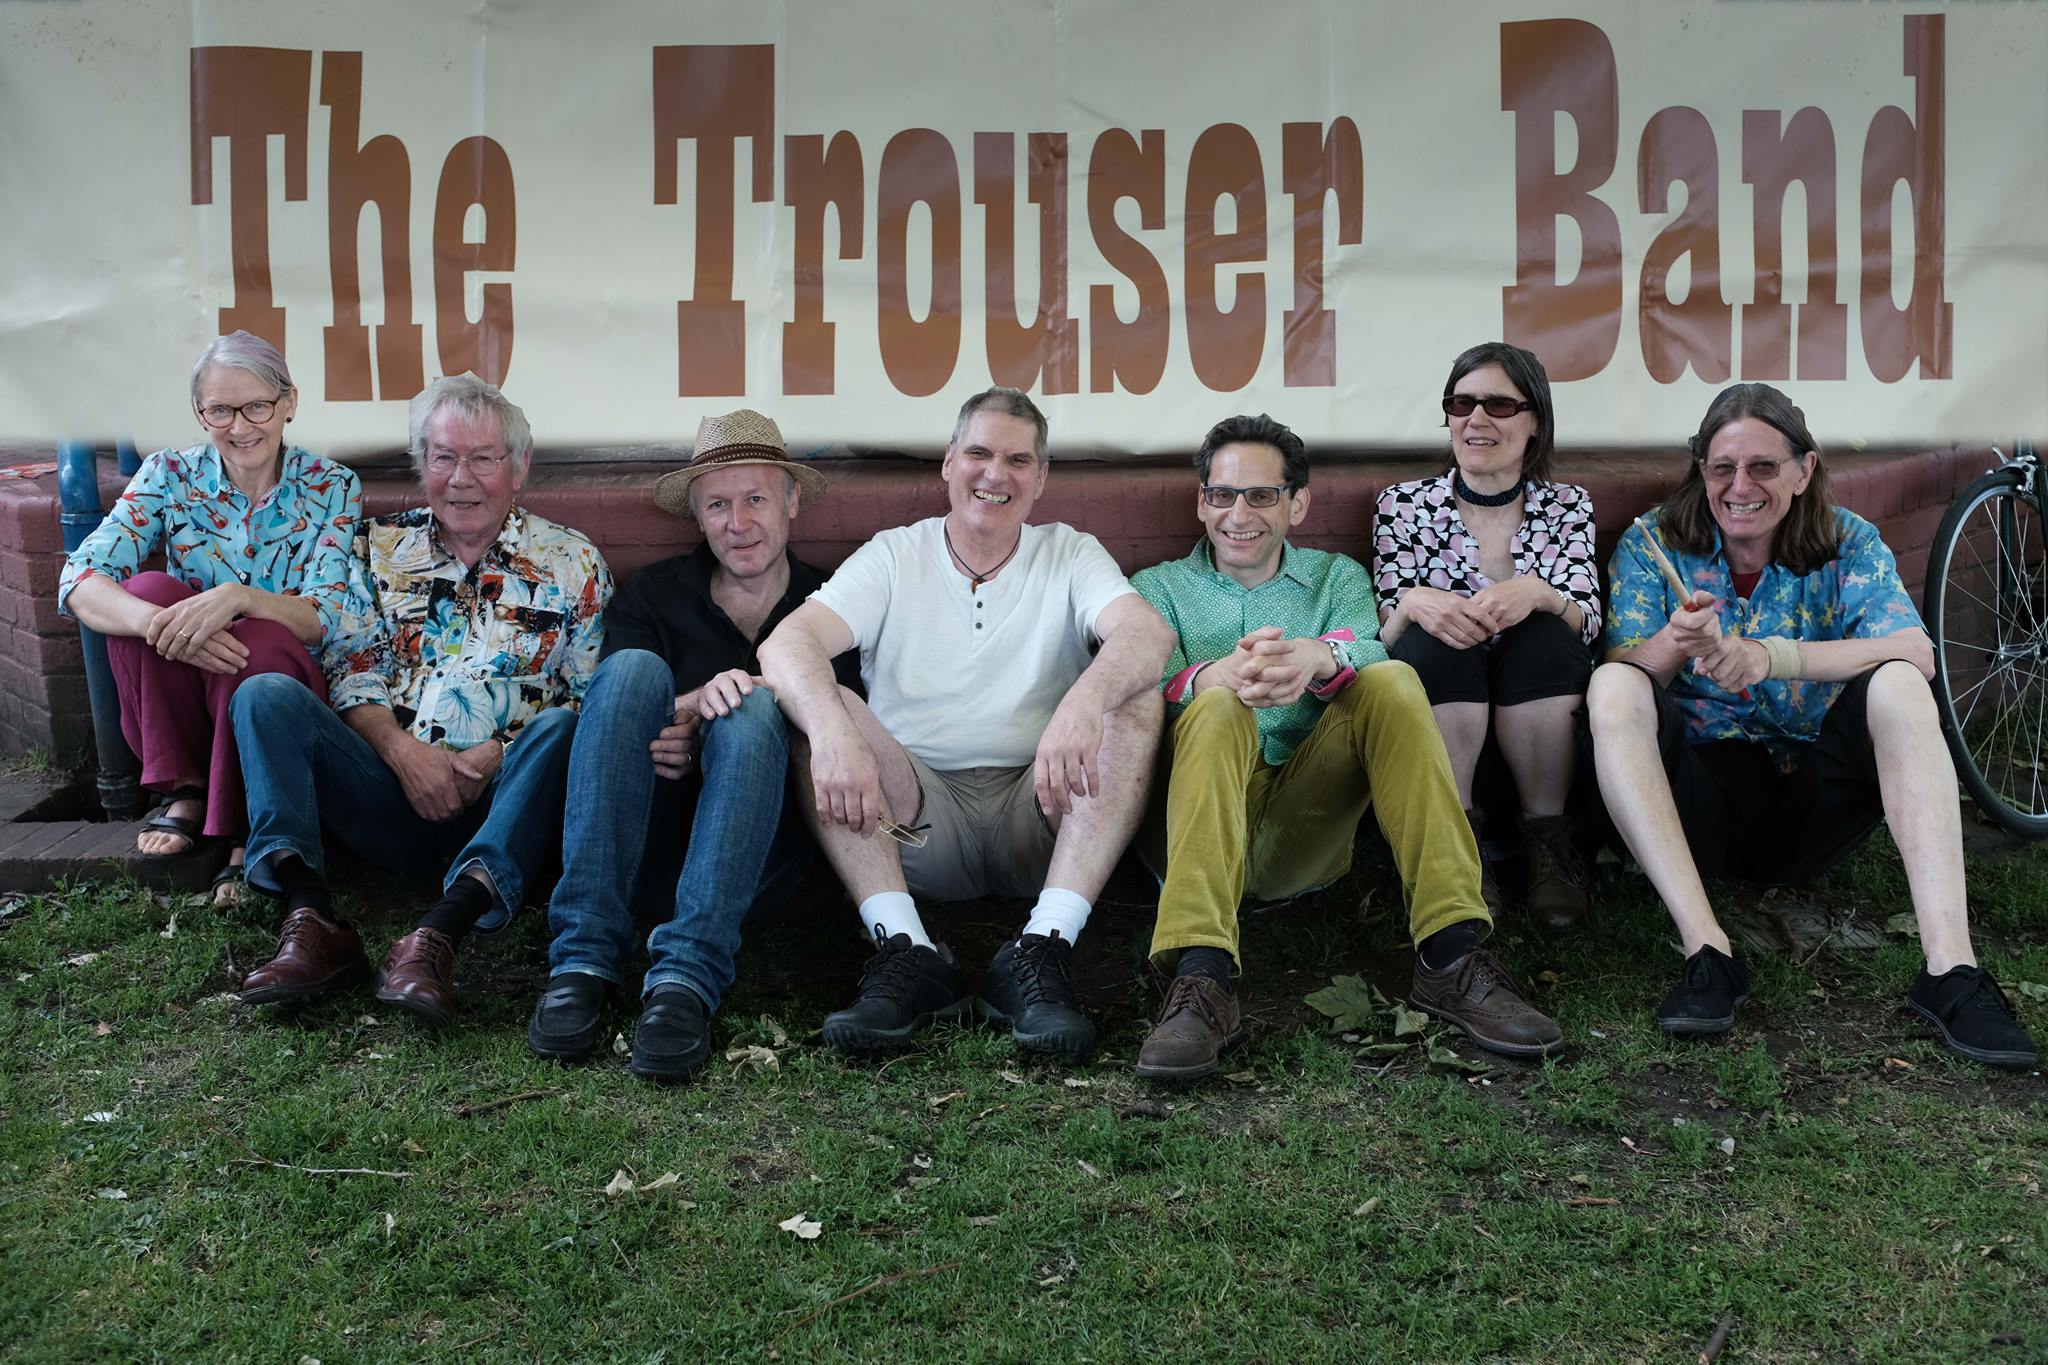 The Trouser Band Profile Pic